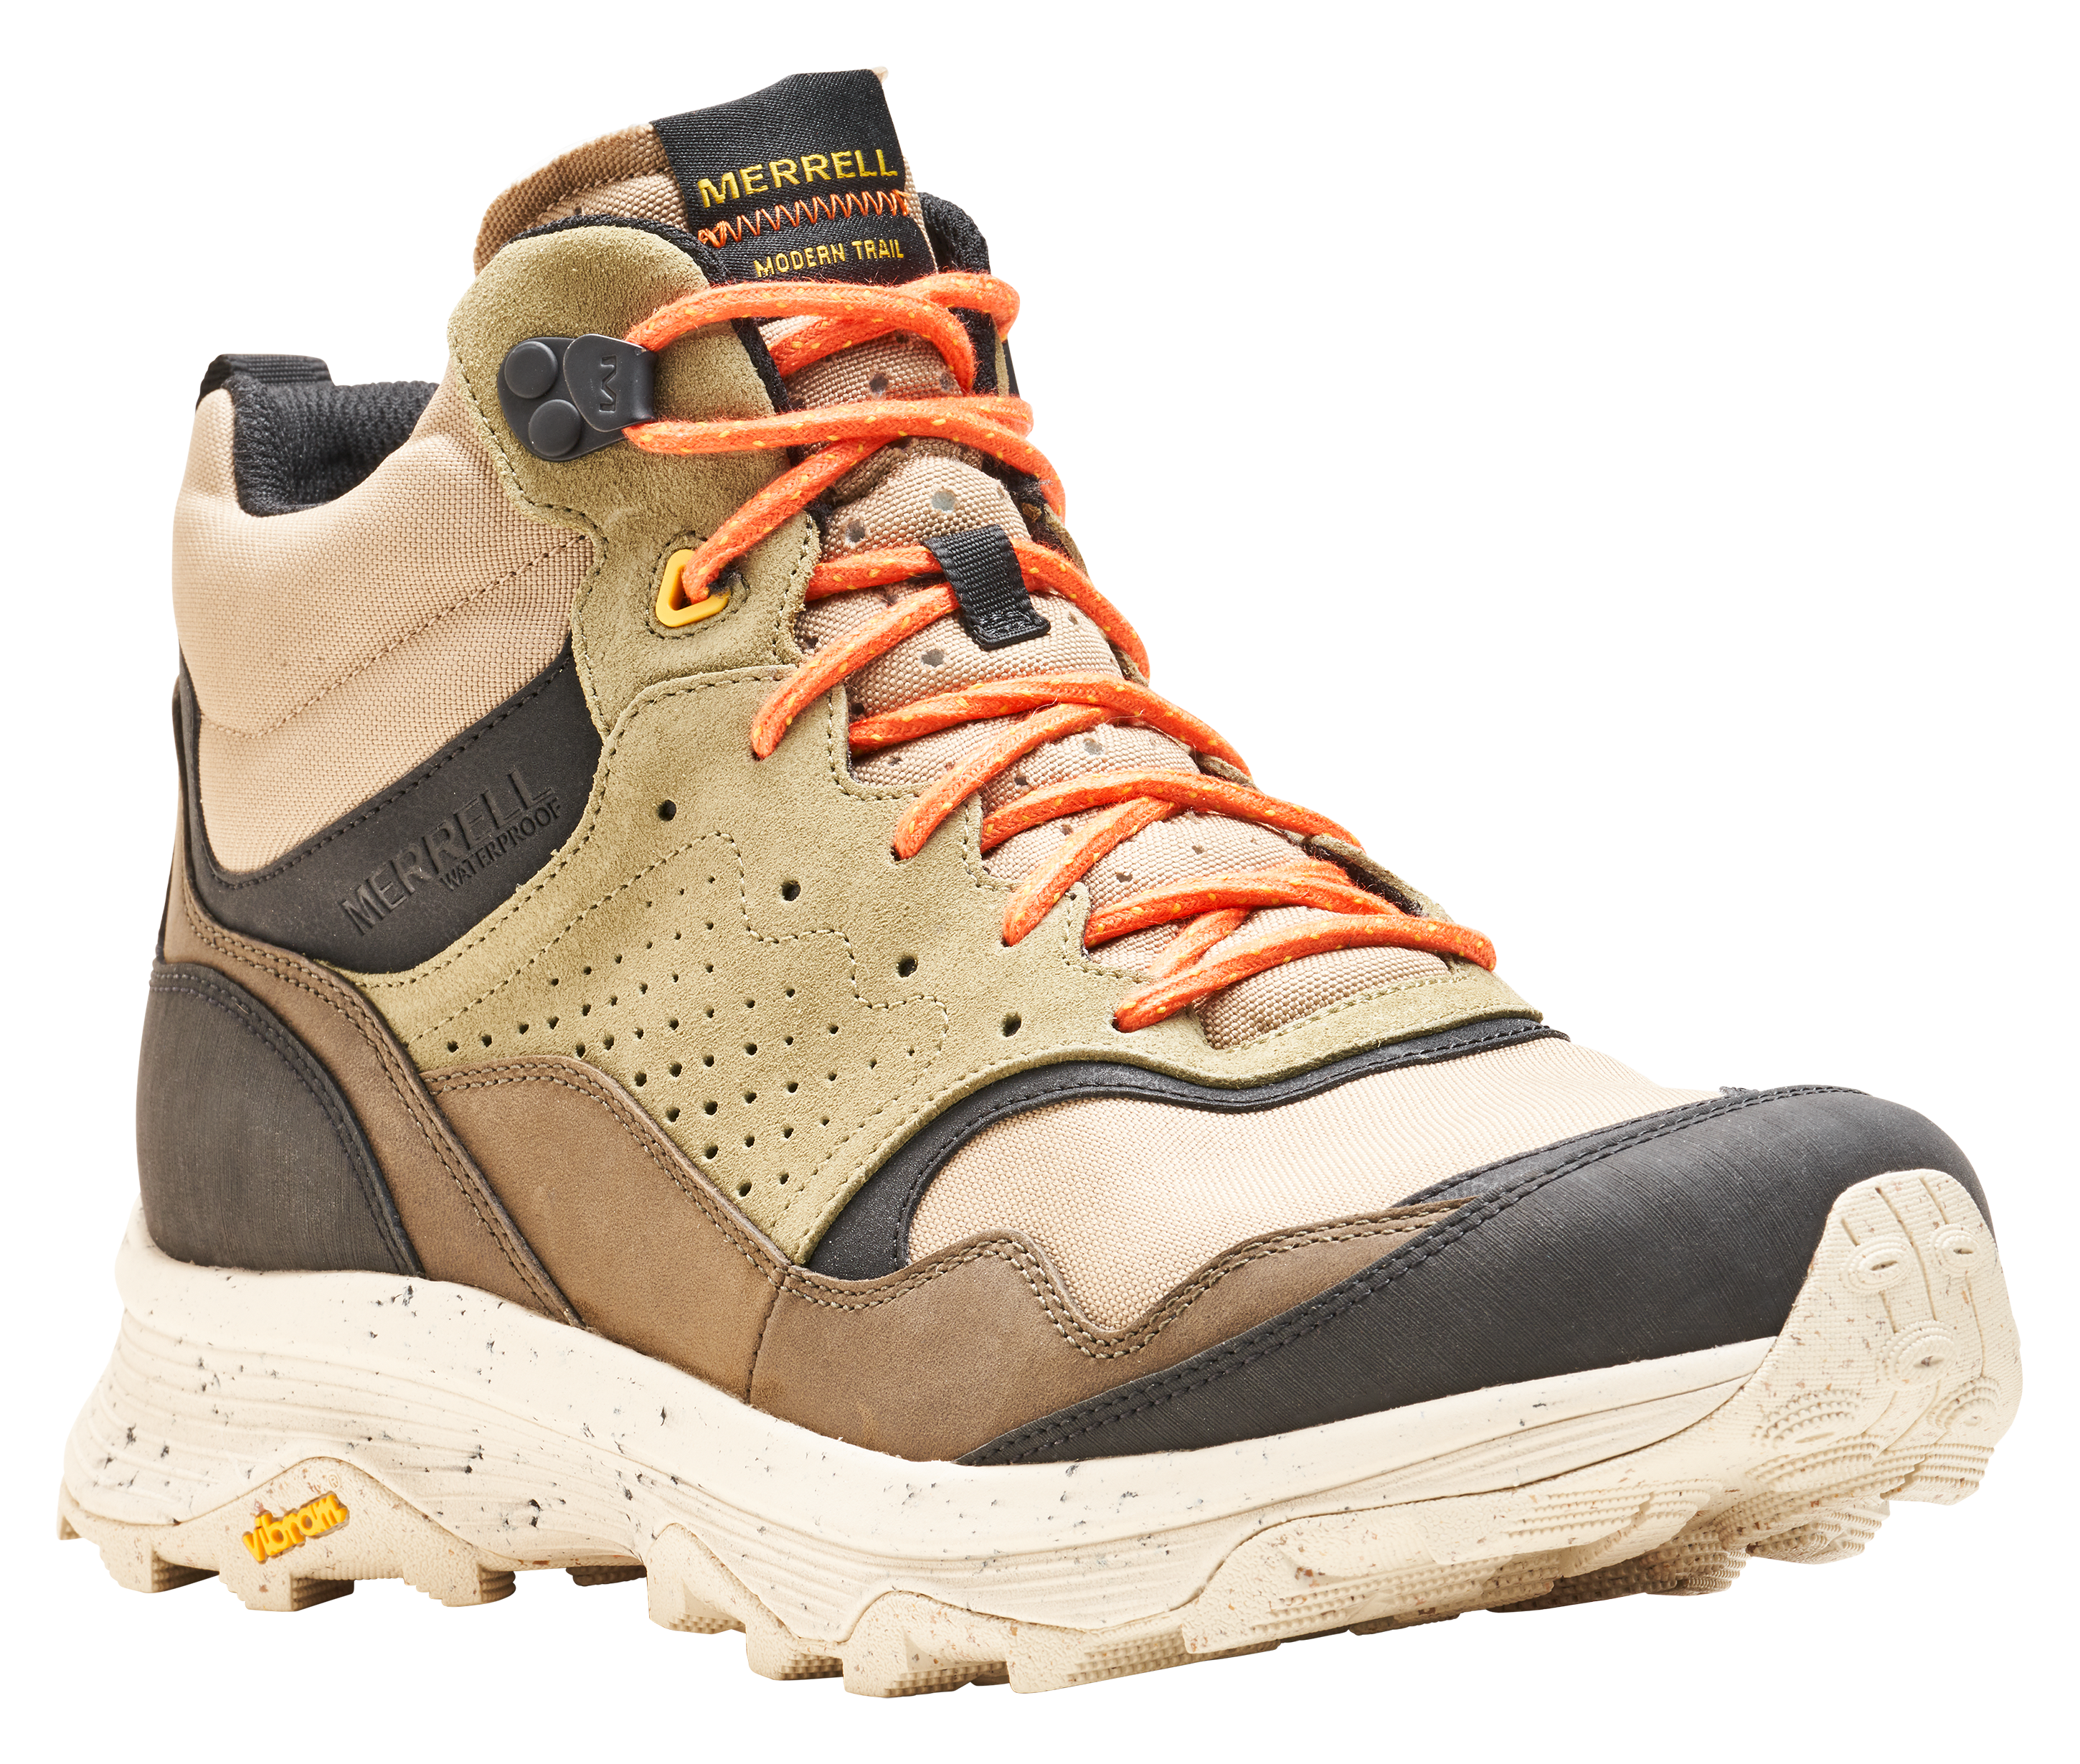 Speed Solo Mid Waterproof Hiking Boots for Men | Pro Shops